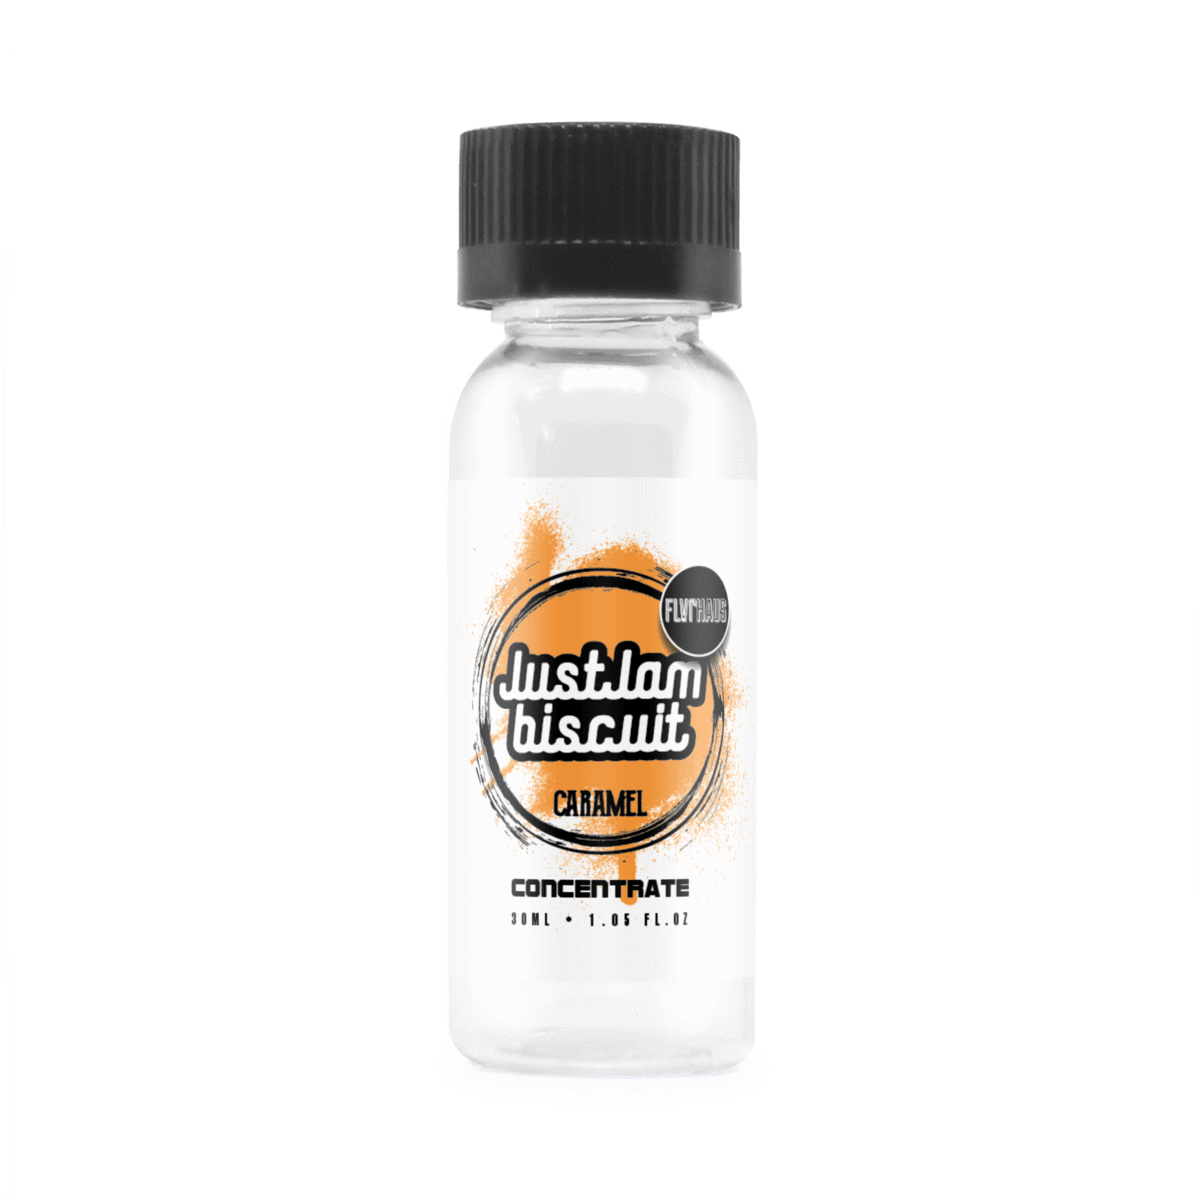 Caramel Biscuit Concentrate E-Liquid by Just Jam 30ml